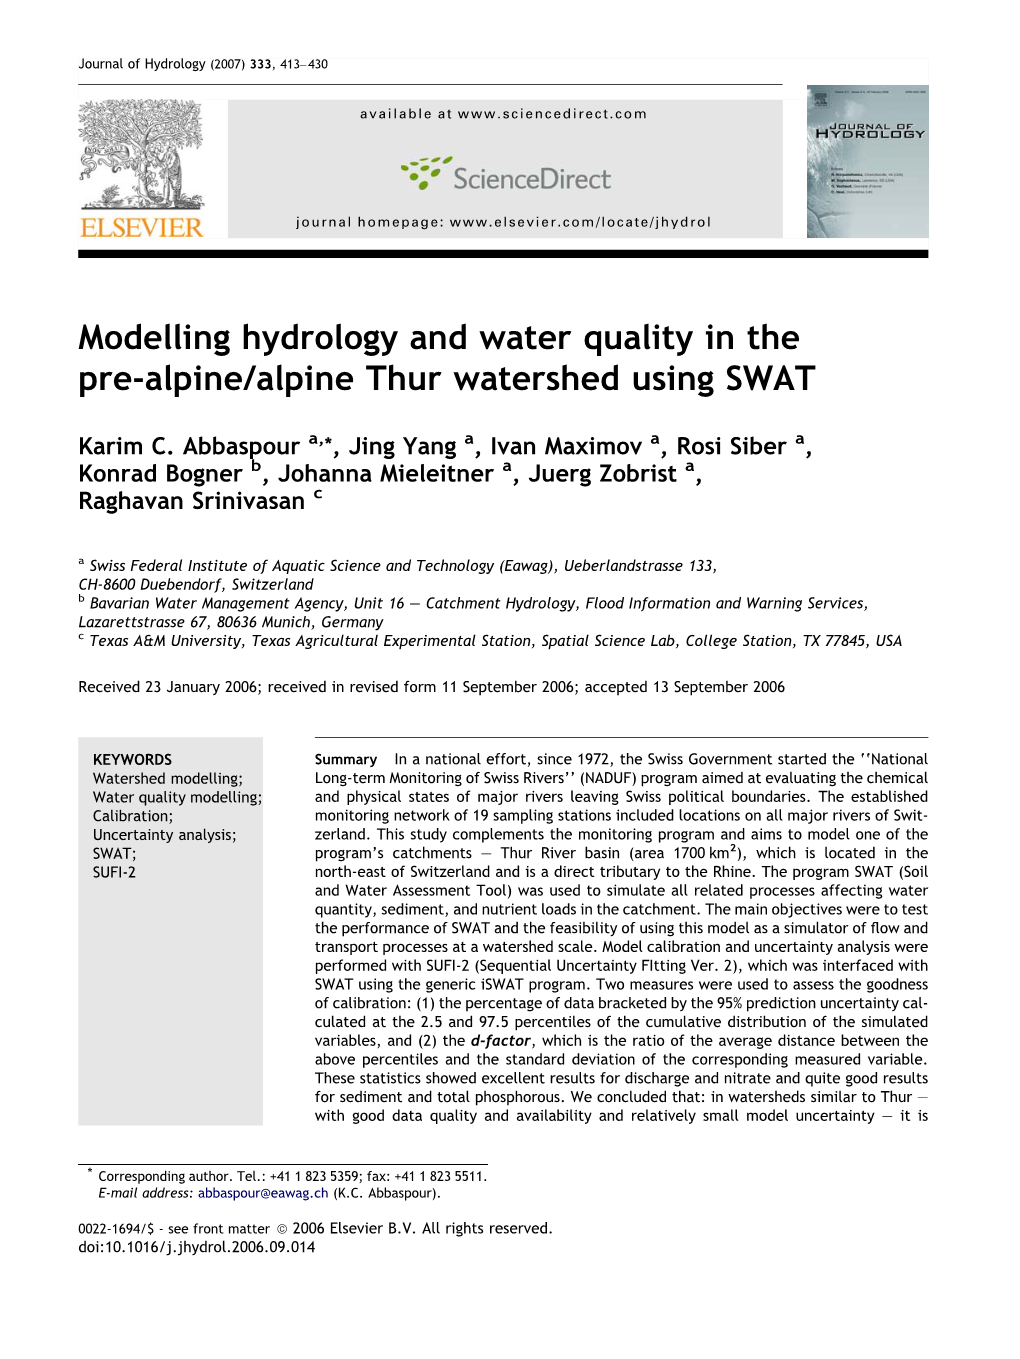 Modelling Hydrology and Water Quality in the Pre-Alpine/Alpine Thur Watershed Using SWAT